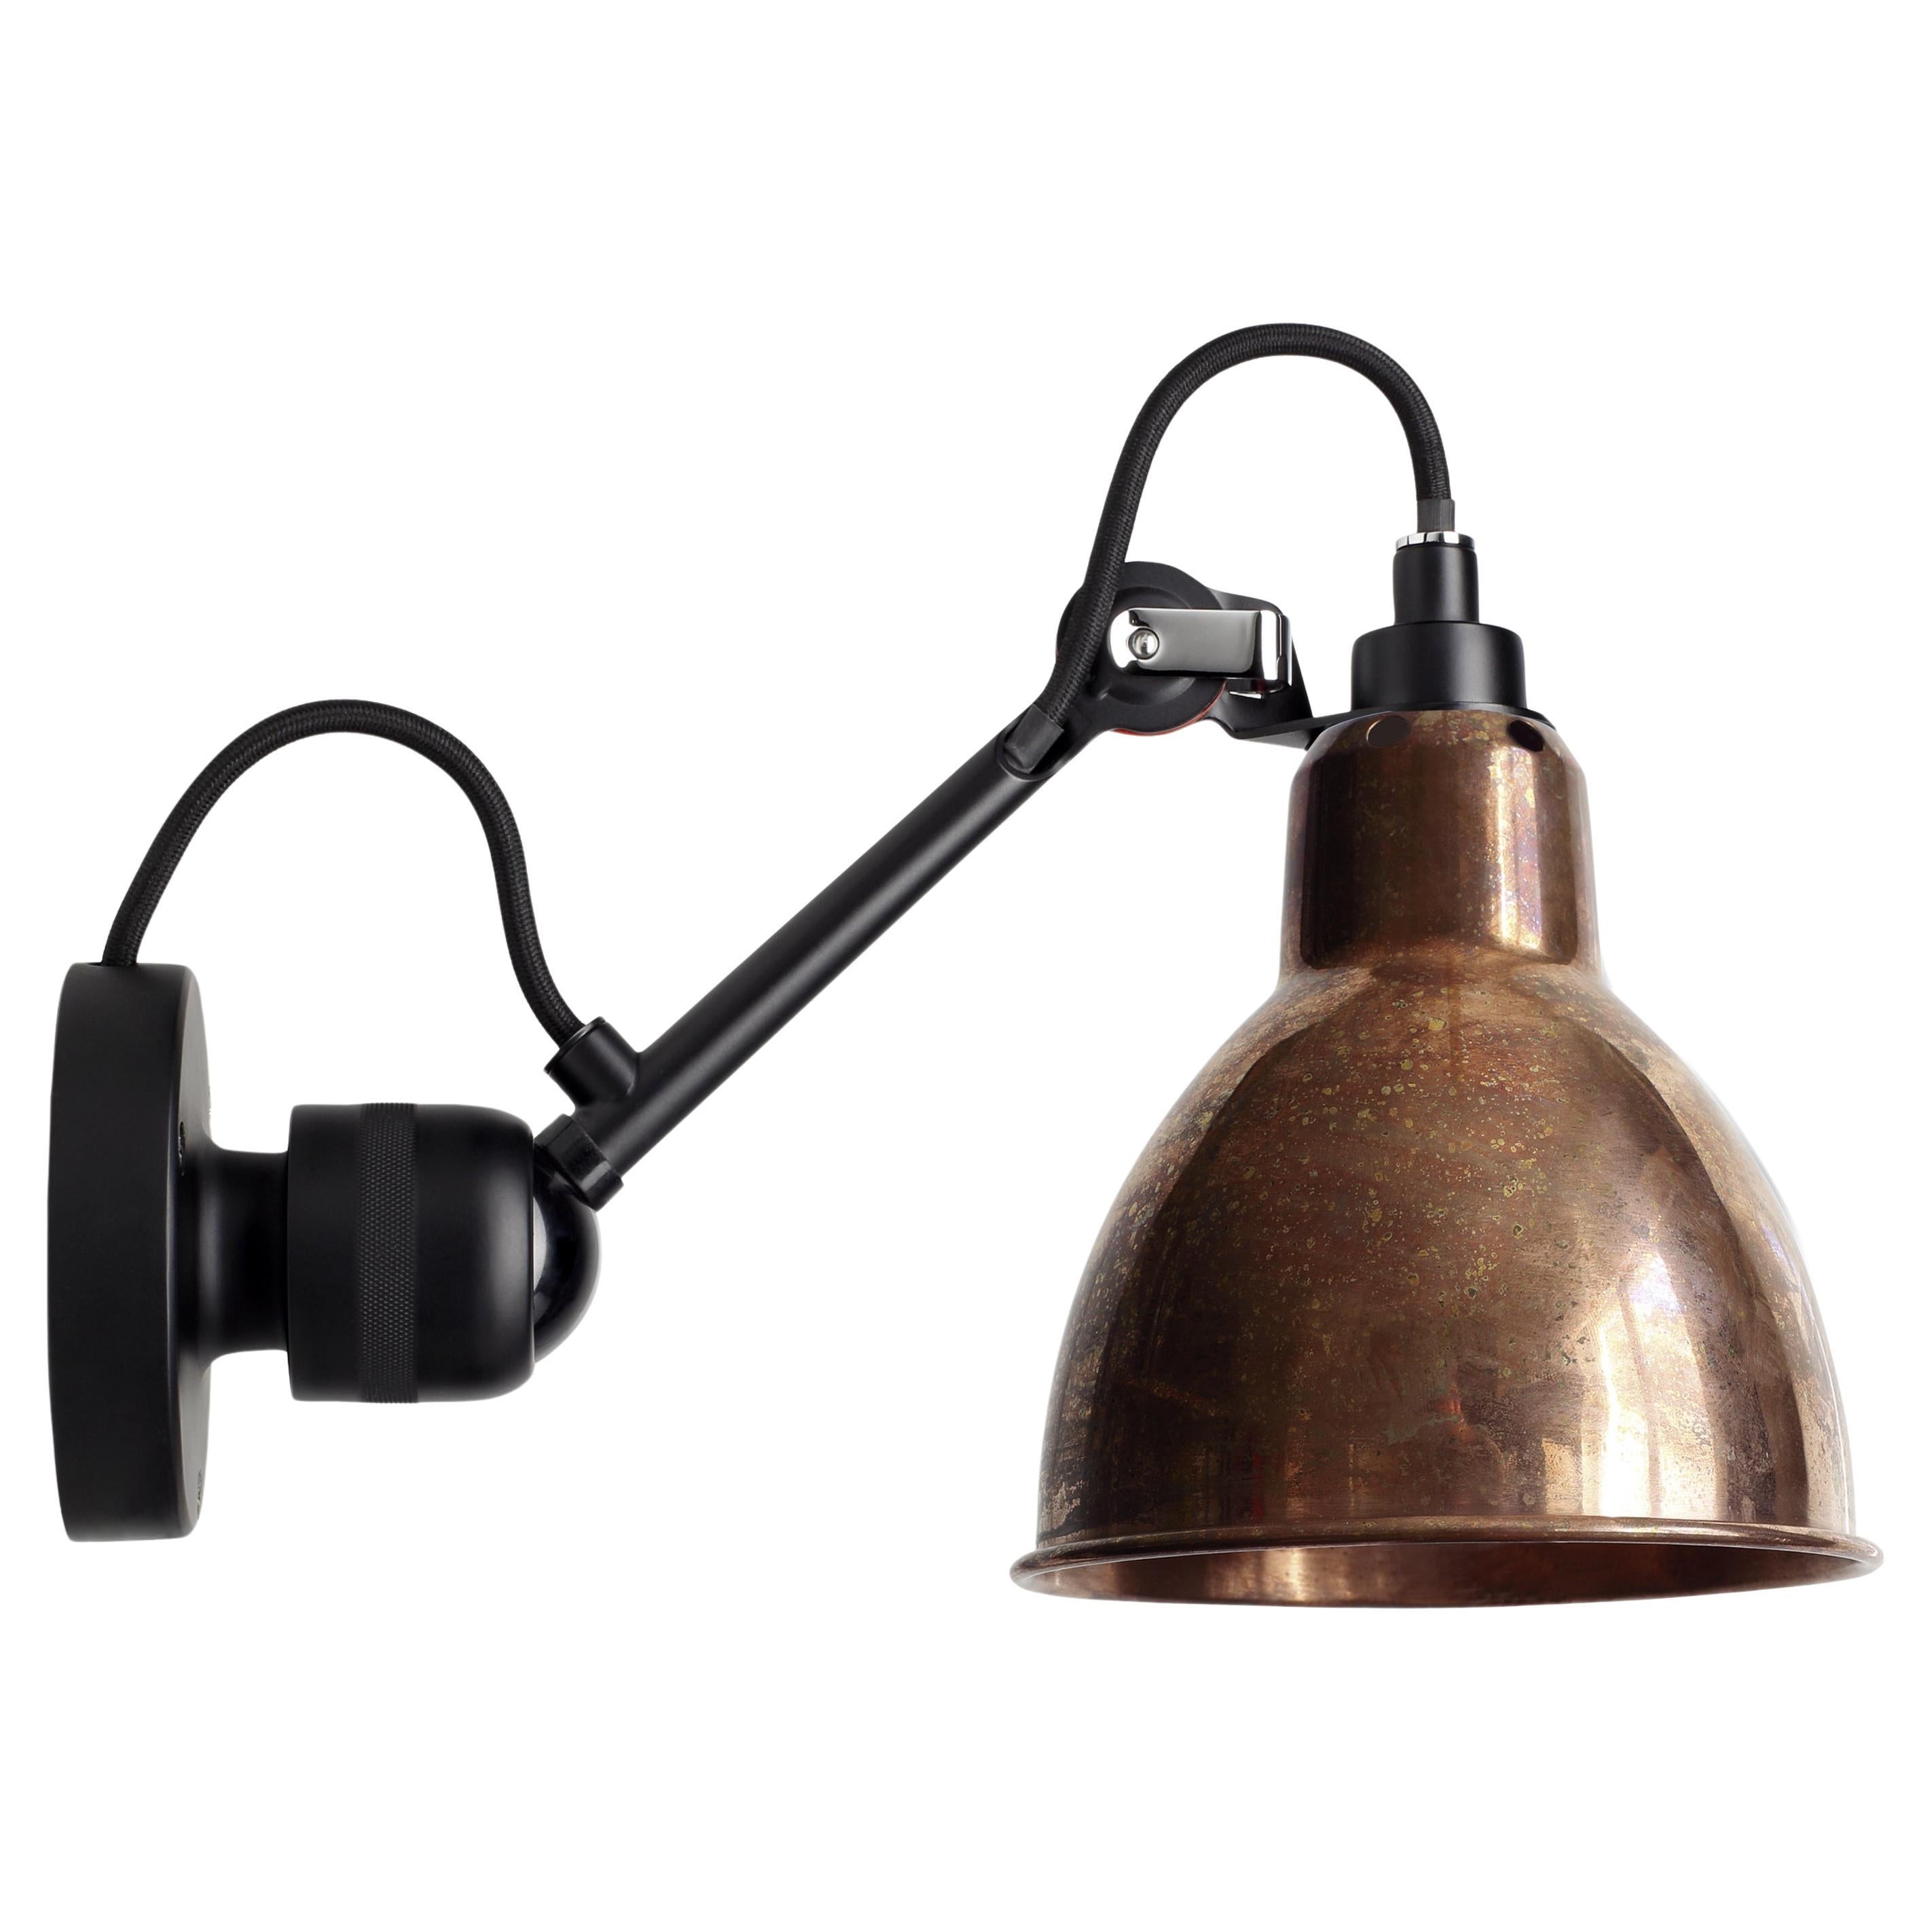 DCW Editions La Lampe Gras N°304 Wall Lamp in Black Arm and Raw Copper Shade